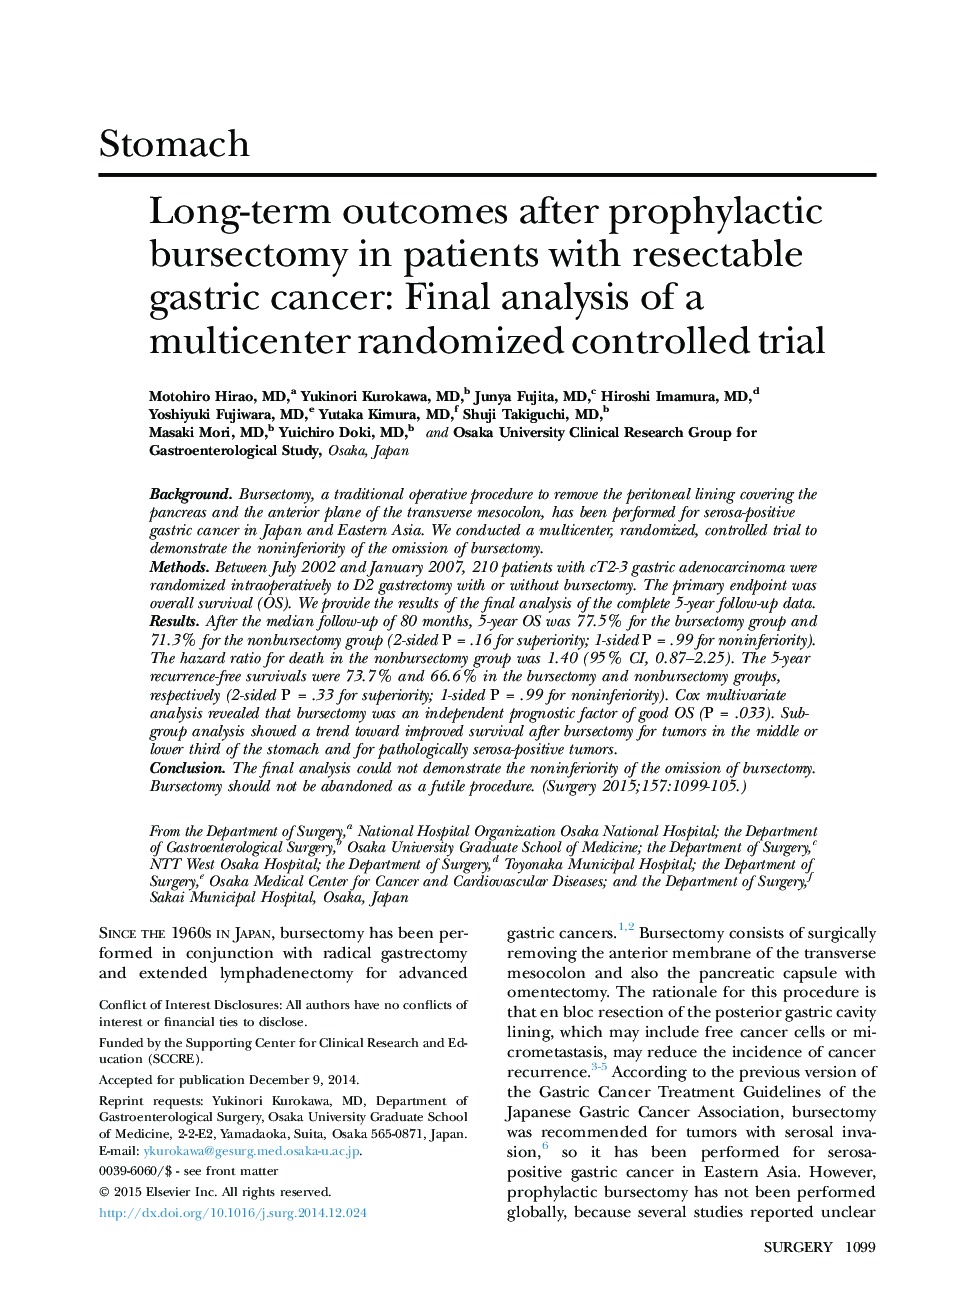 StomachLong-term outcomes after prophylactic bursectomy in patients with resectable gastric cancer: Final analysis of a multicenter randomized controlledÂ trial